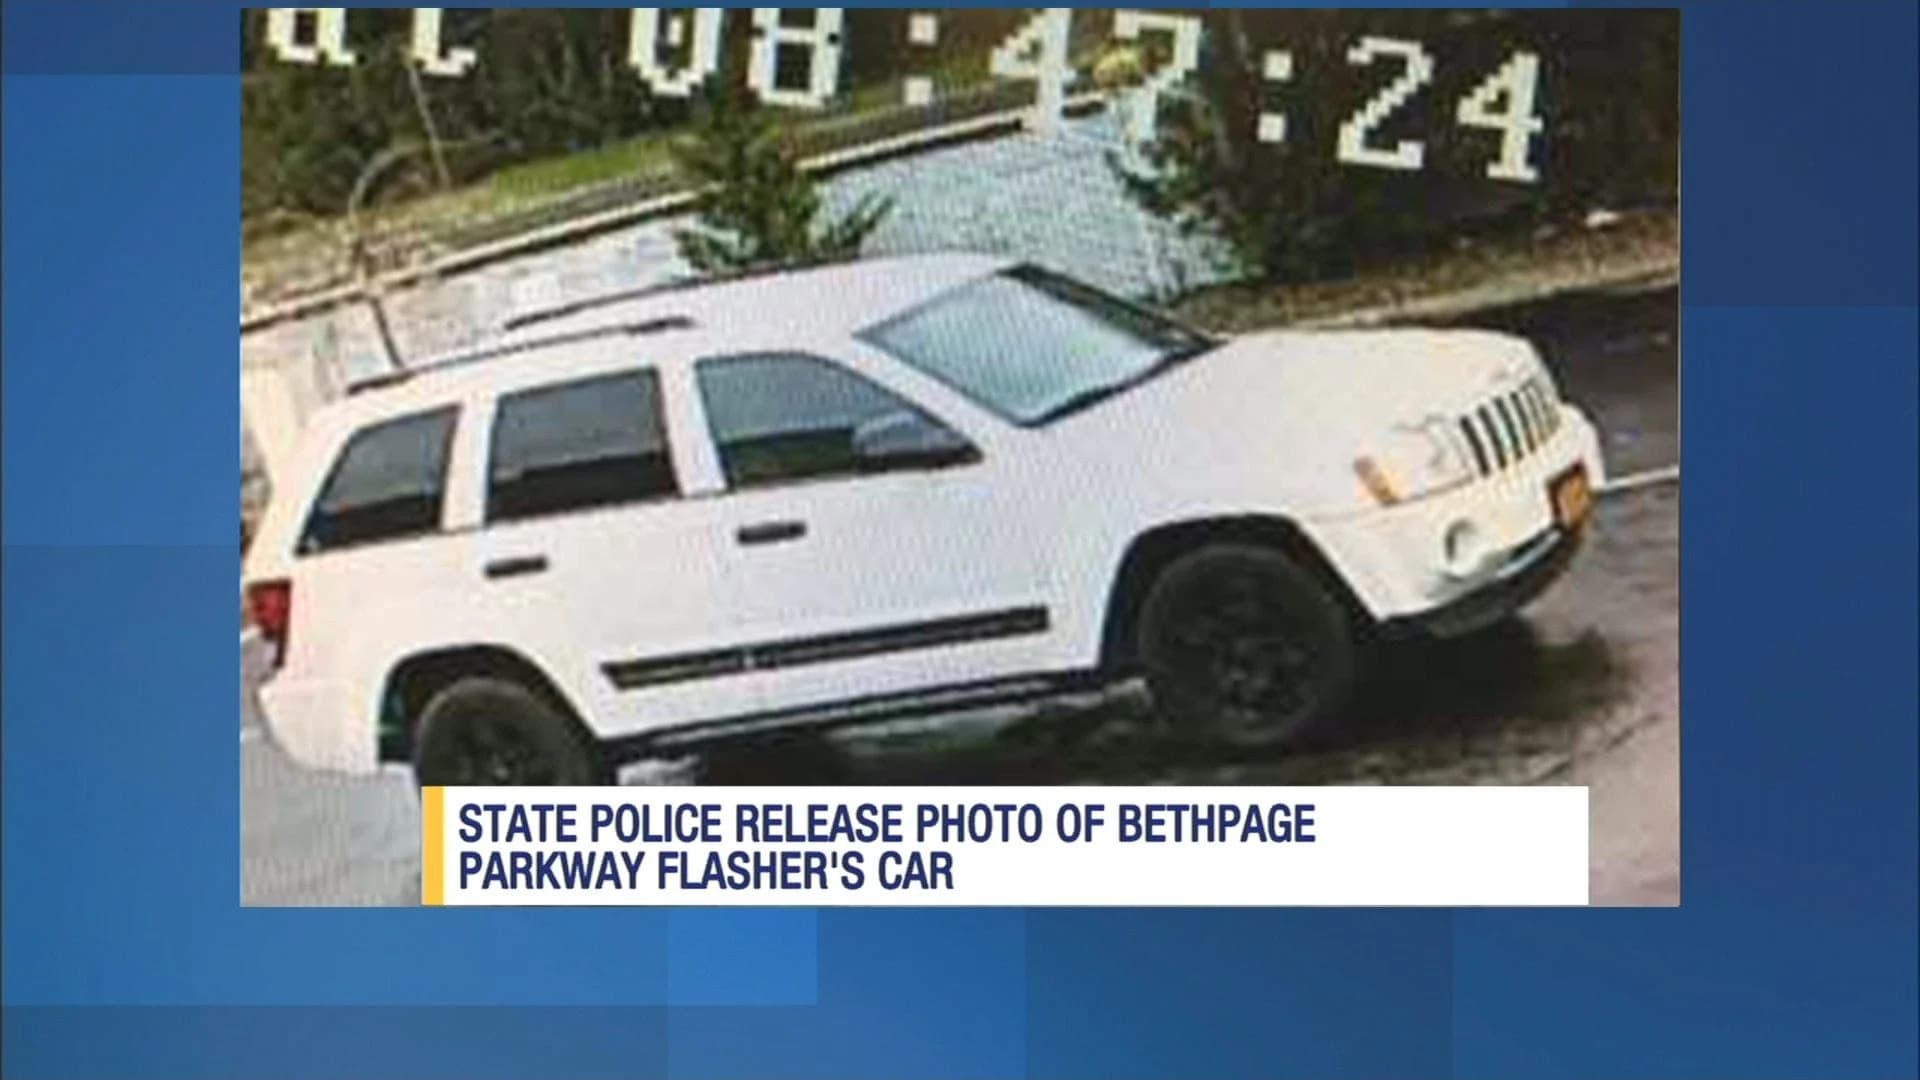 Police release pictures of SUV involved in parkway flasher incident